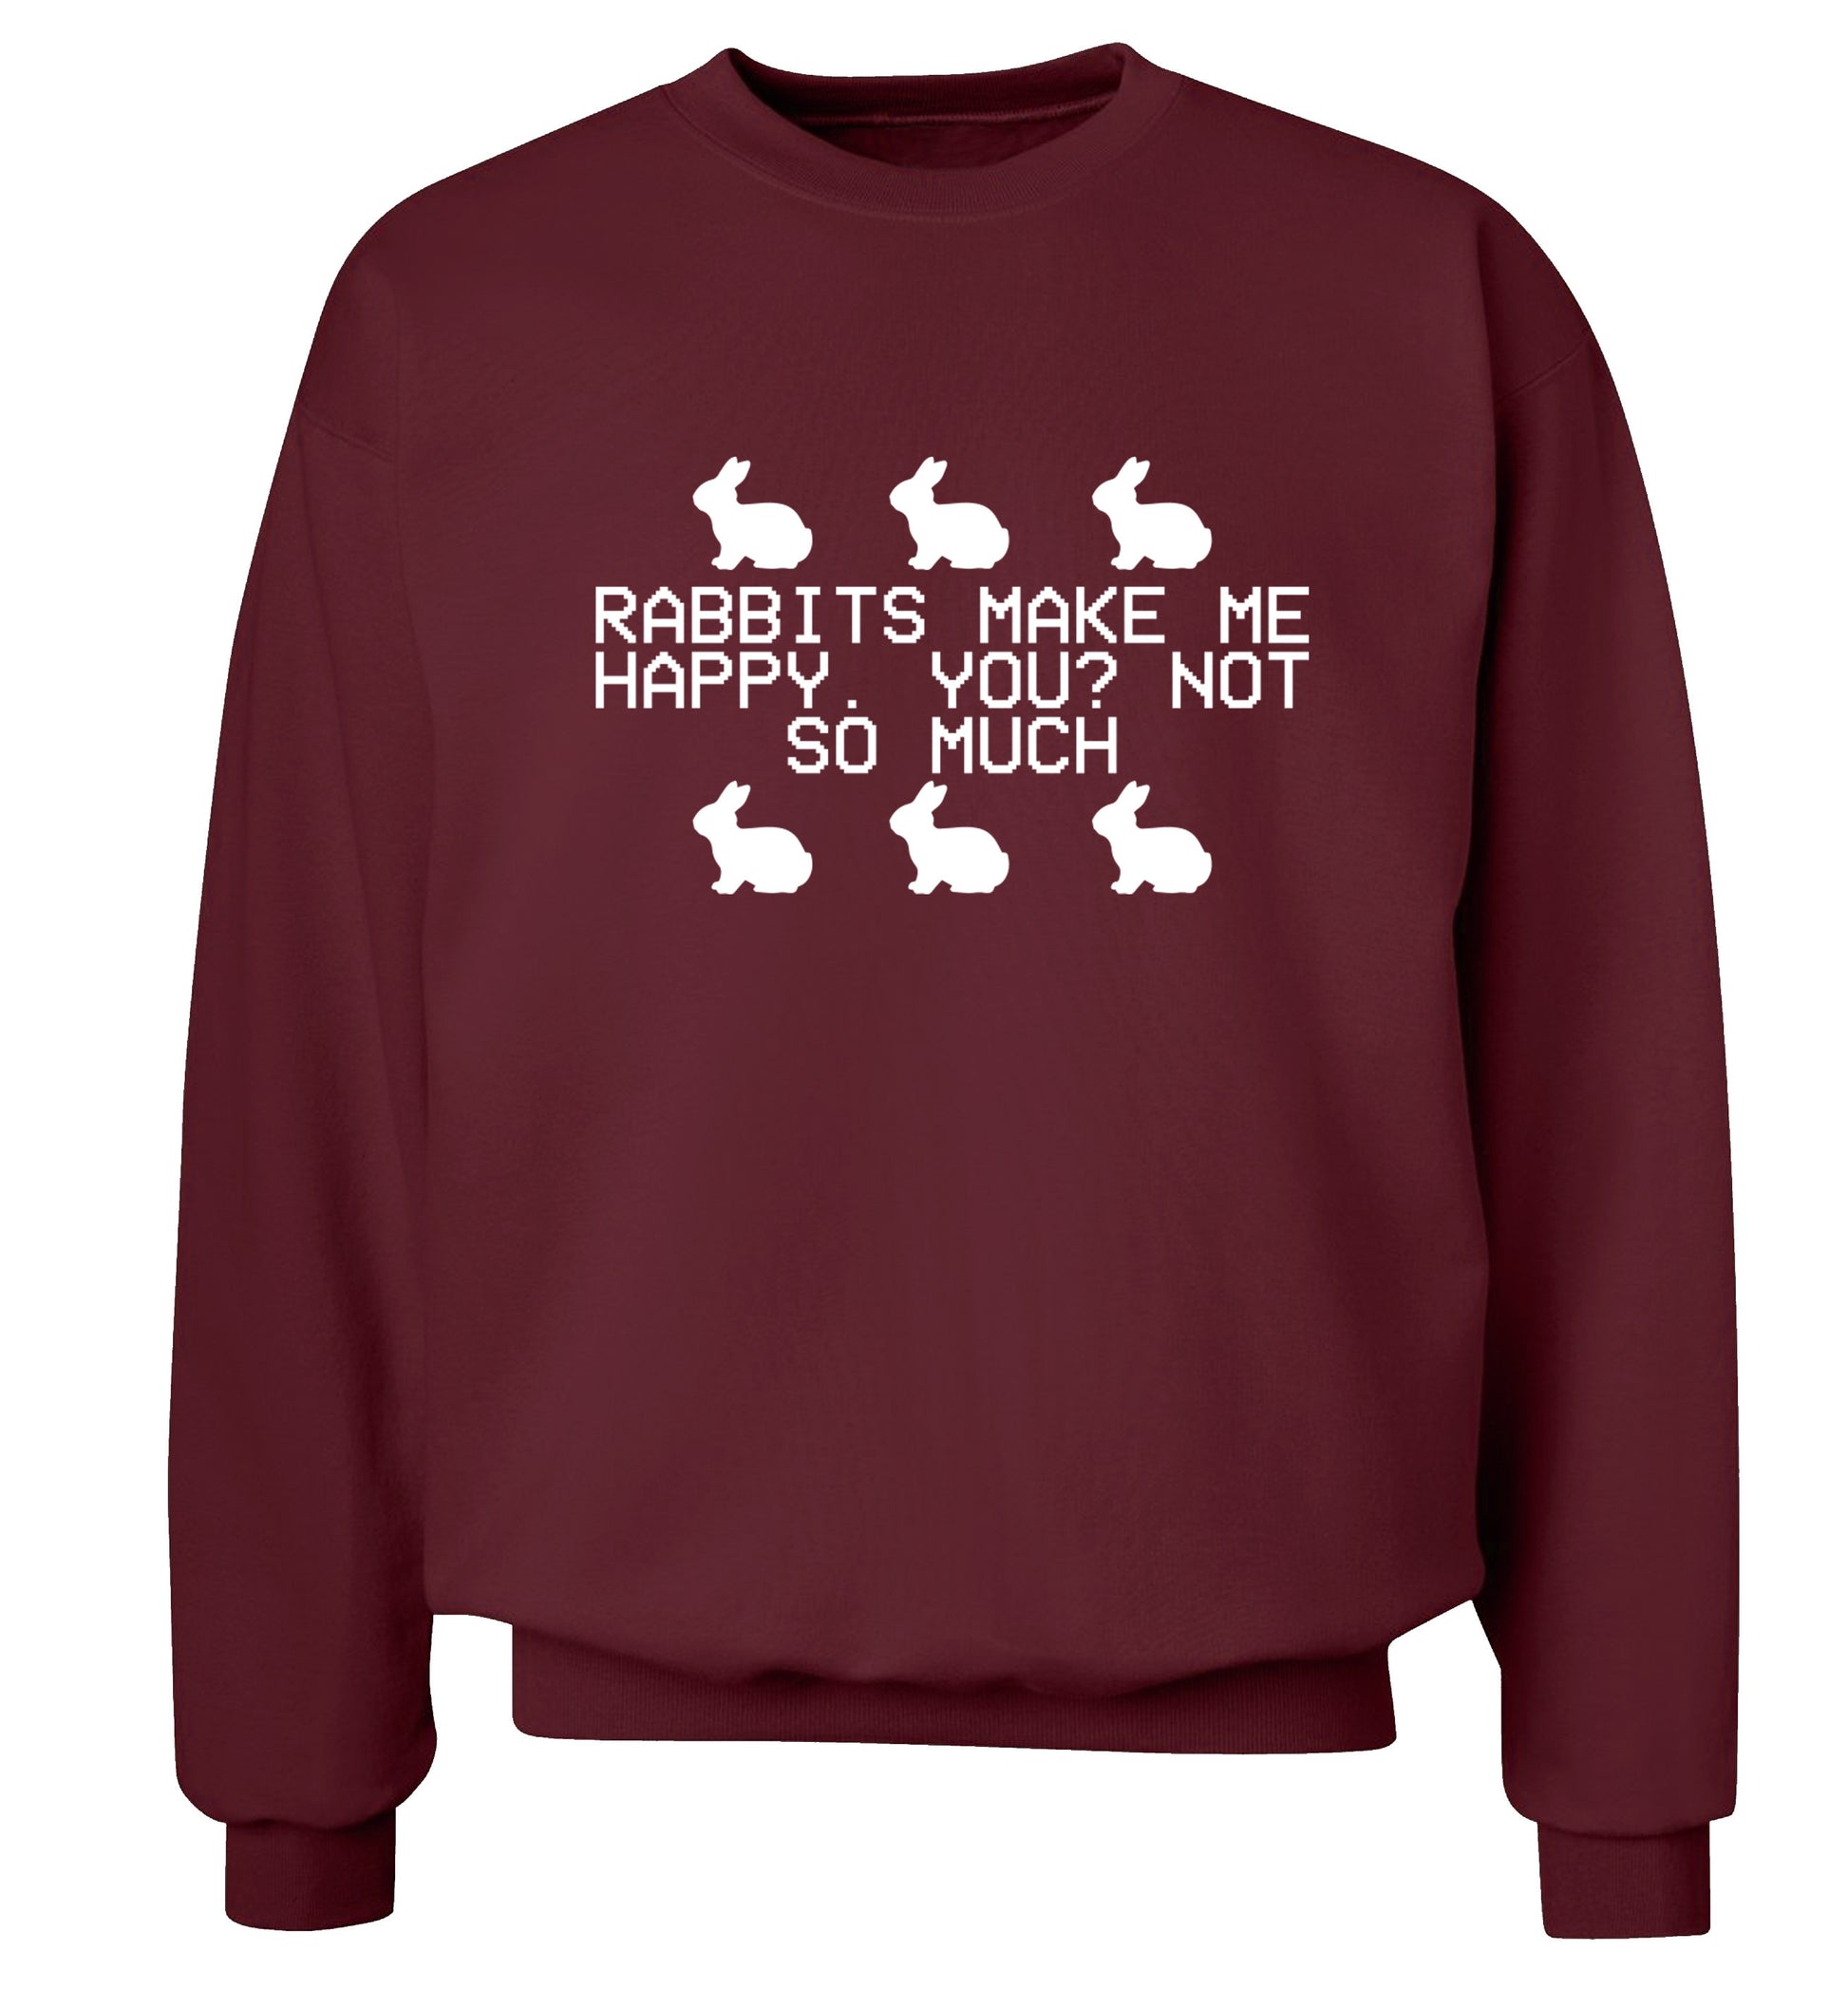 Rabbits make me happy, you not so much Adult's unisex maroon  sweater 2XL